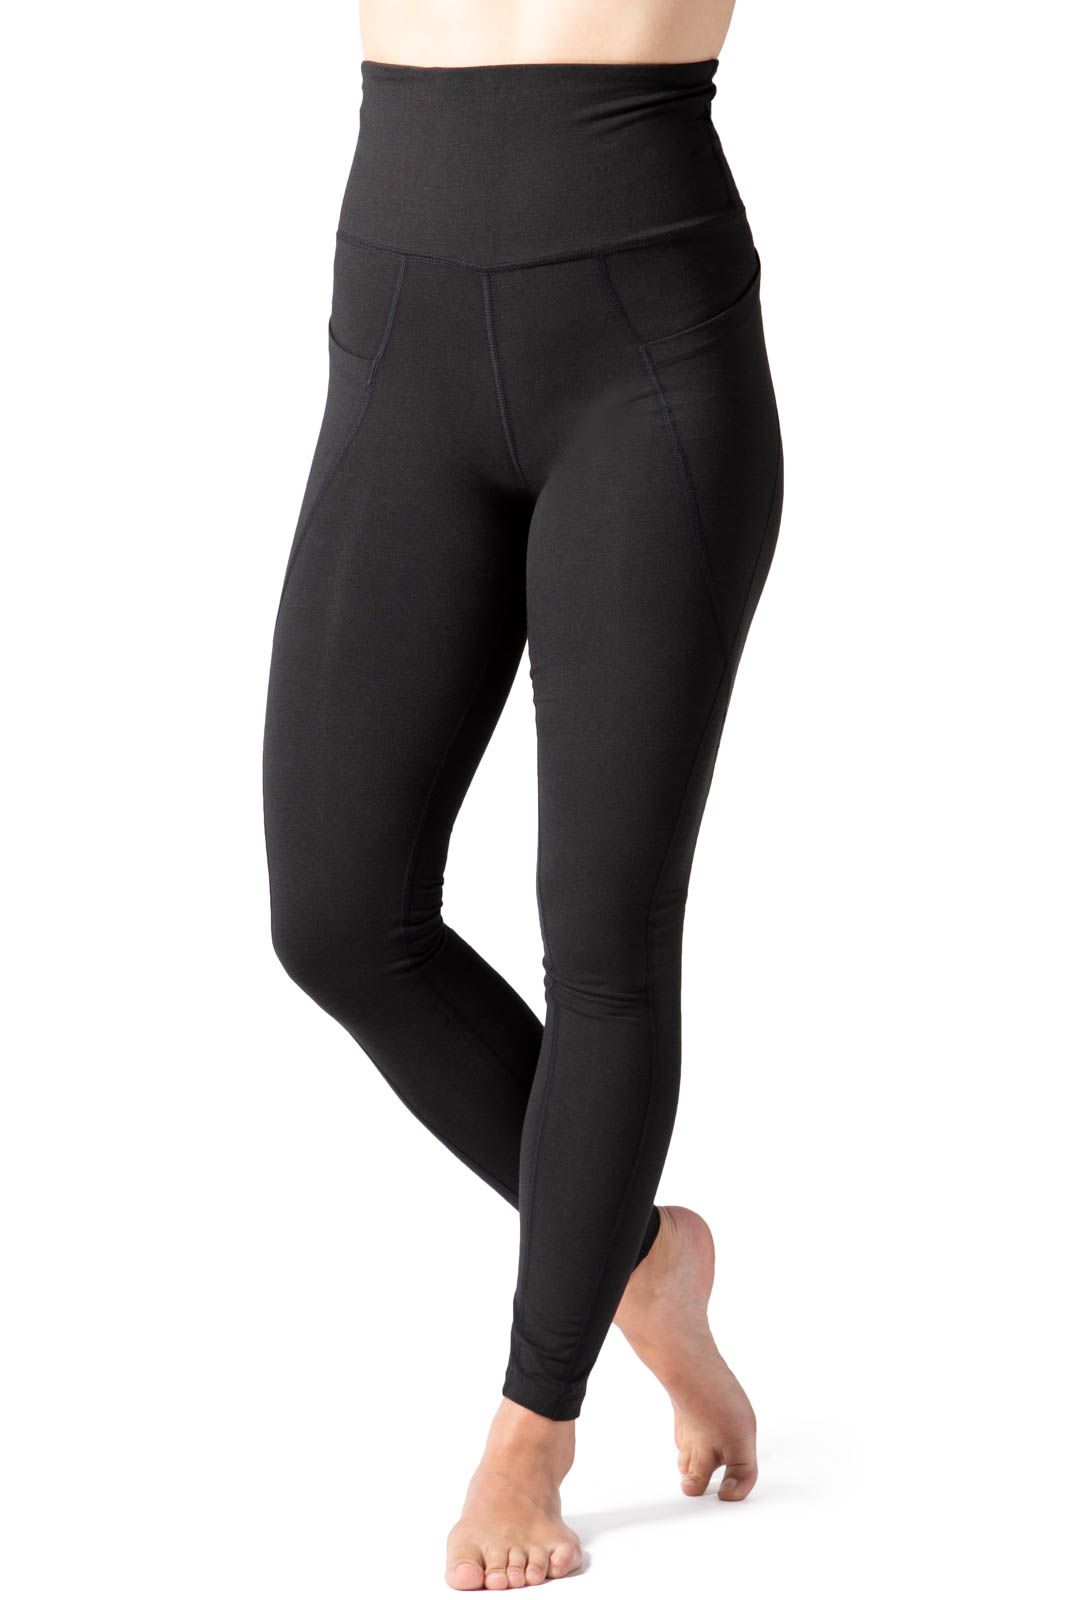 BLINKIN Women's Gym Wear Tights | Track Pants with Mesh Insert & Side  Pockets : Ideal for Active Wear, Yoga & Workout - The Ultimate Gym Pants  for Women & Girls((9600,Color_Black,Size_S) Skinny